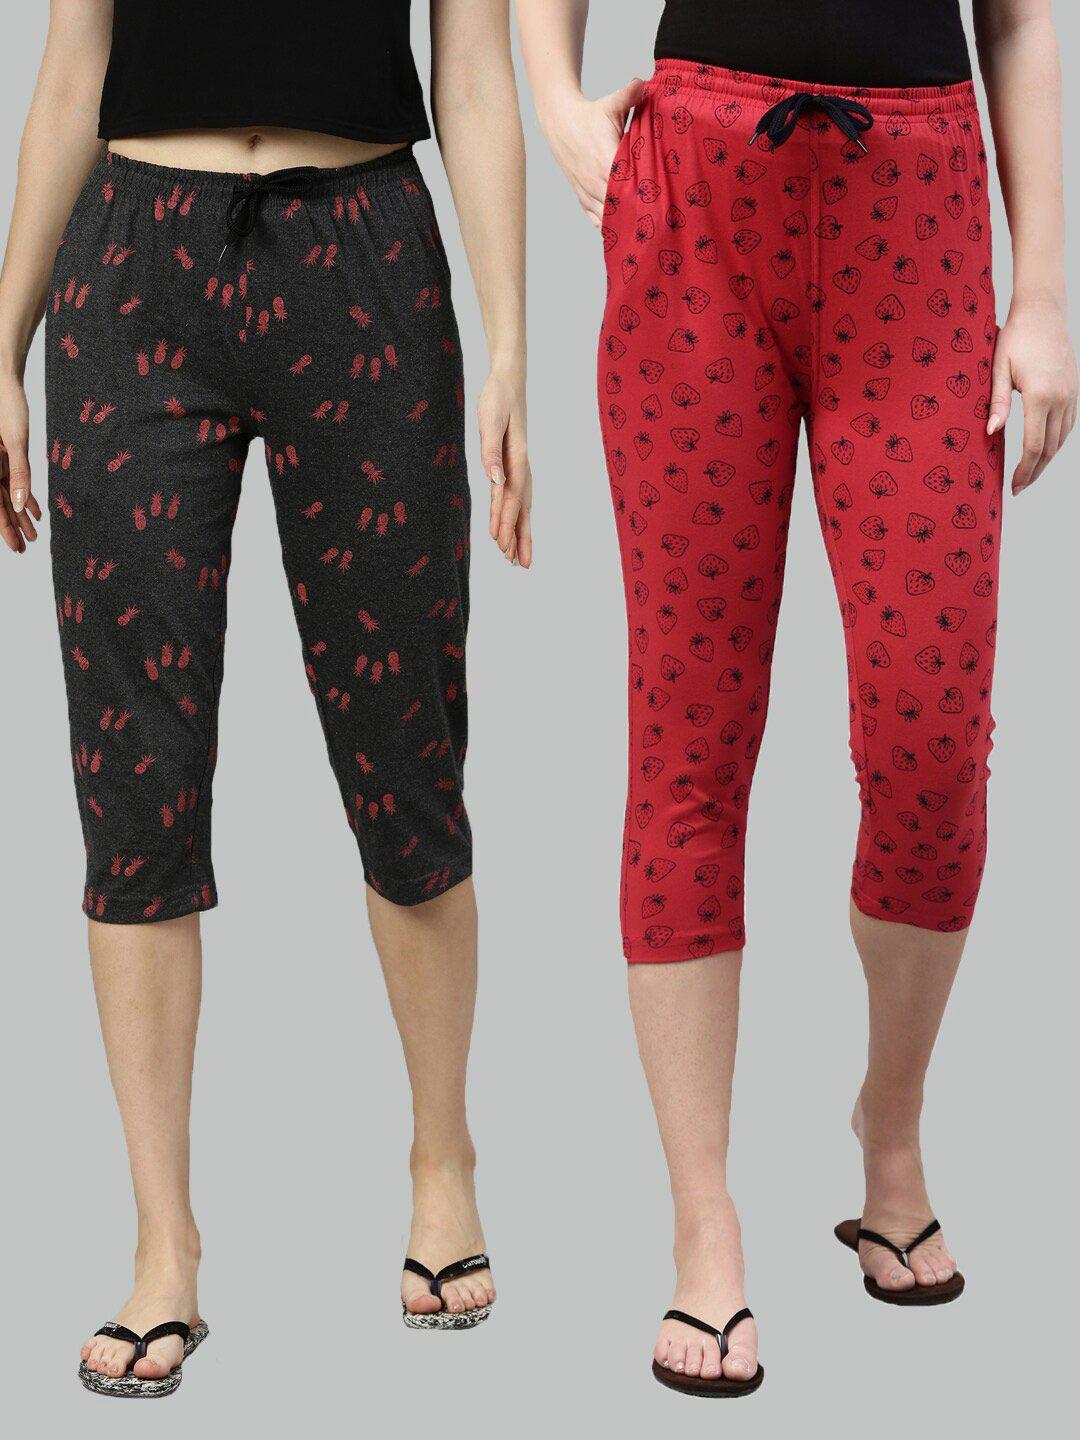 kryptic women pack of 2 grey & red printed cotton capris